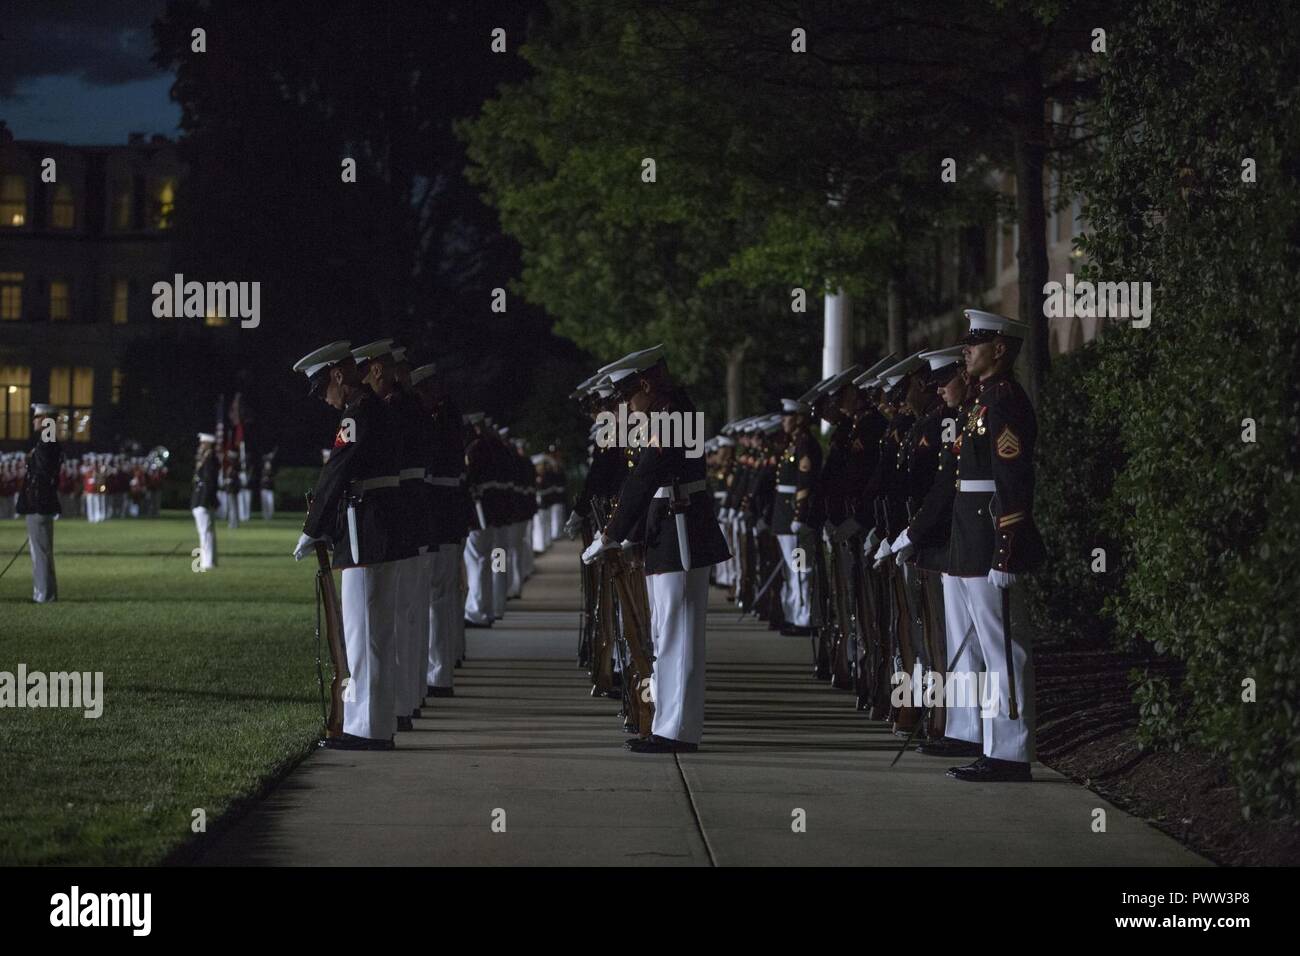 U.S. Marines with Marine Barracks Washington perform during an evening parade, Marine Barracks Washington, Washington, D.C., June 23, 2017. Evening parades are held as a means of honoring senior officials, distinguished citizens and supporters of the Marine Corps. Stock Photo